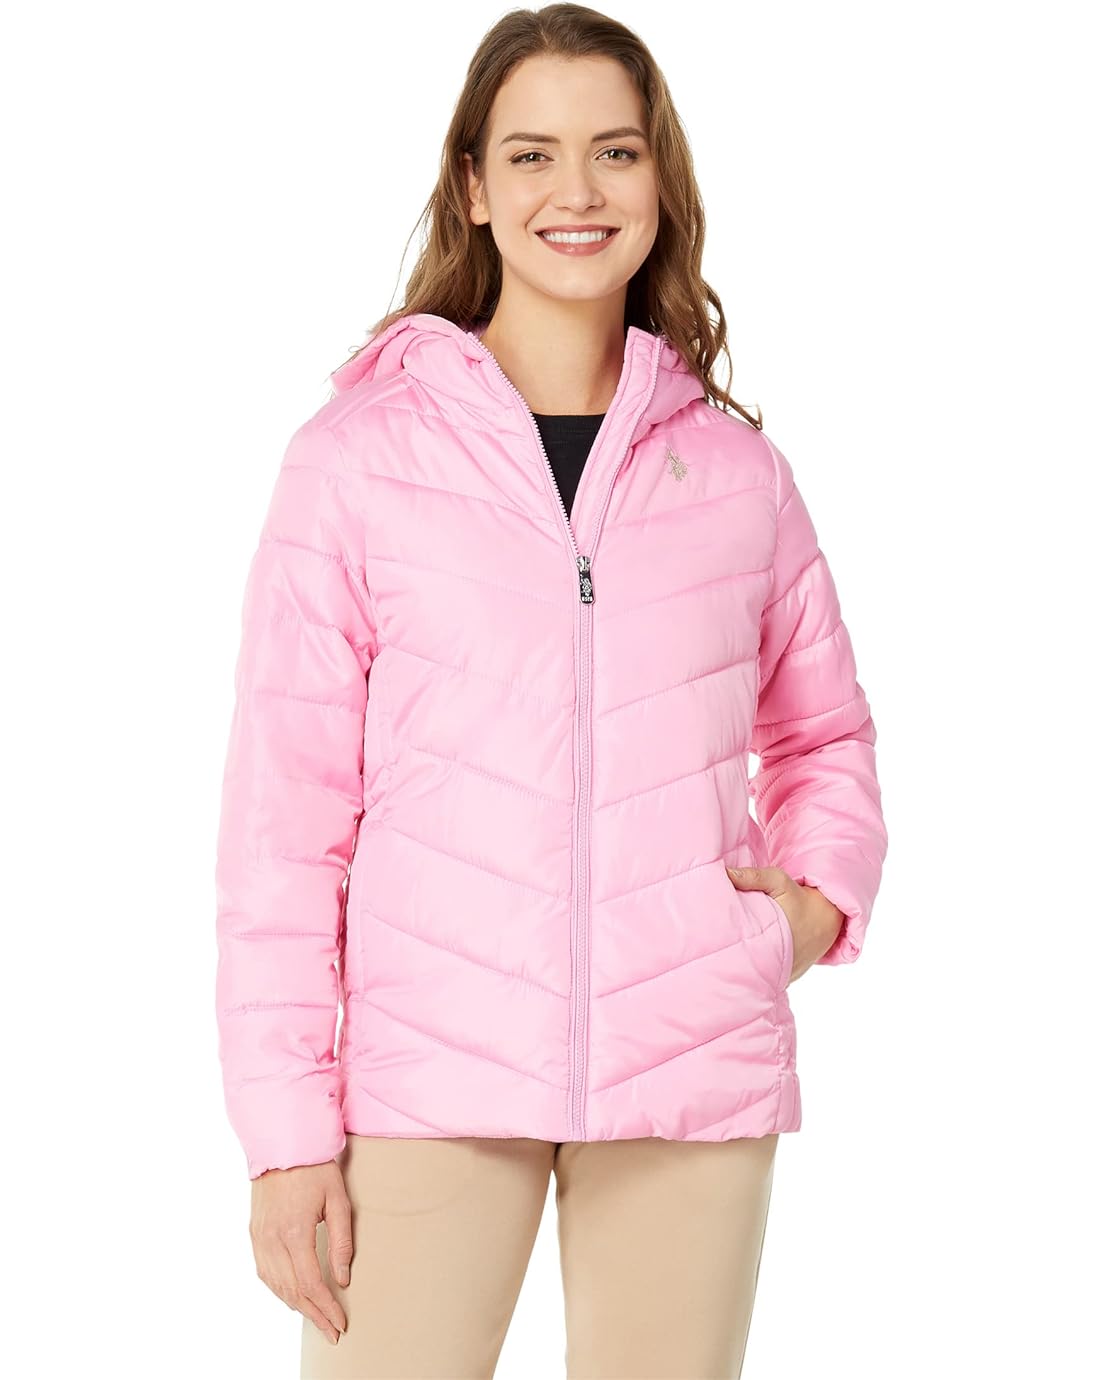 U.S. POLO ASSN. Cozy Faux Fur Lined Hooded Puffer Jacket